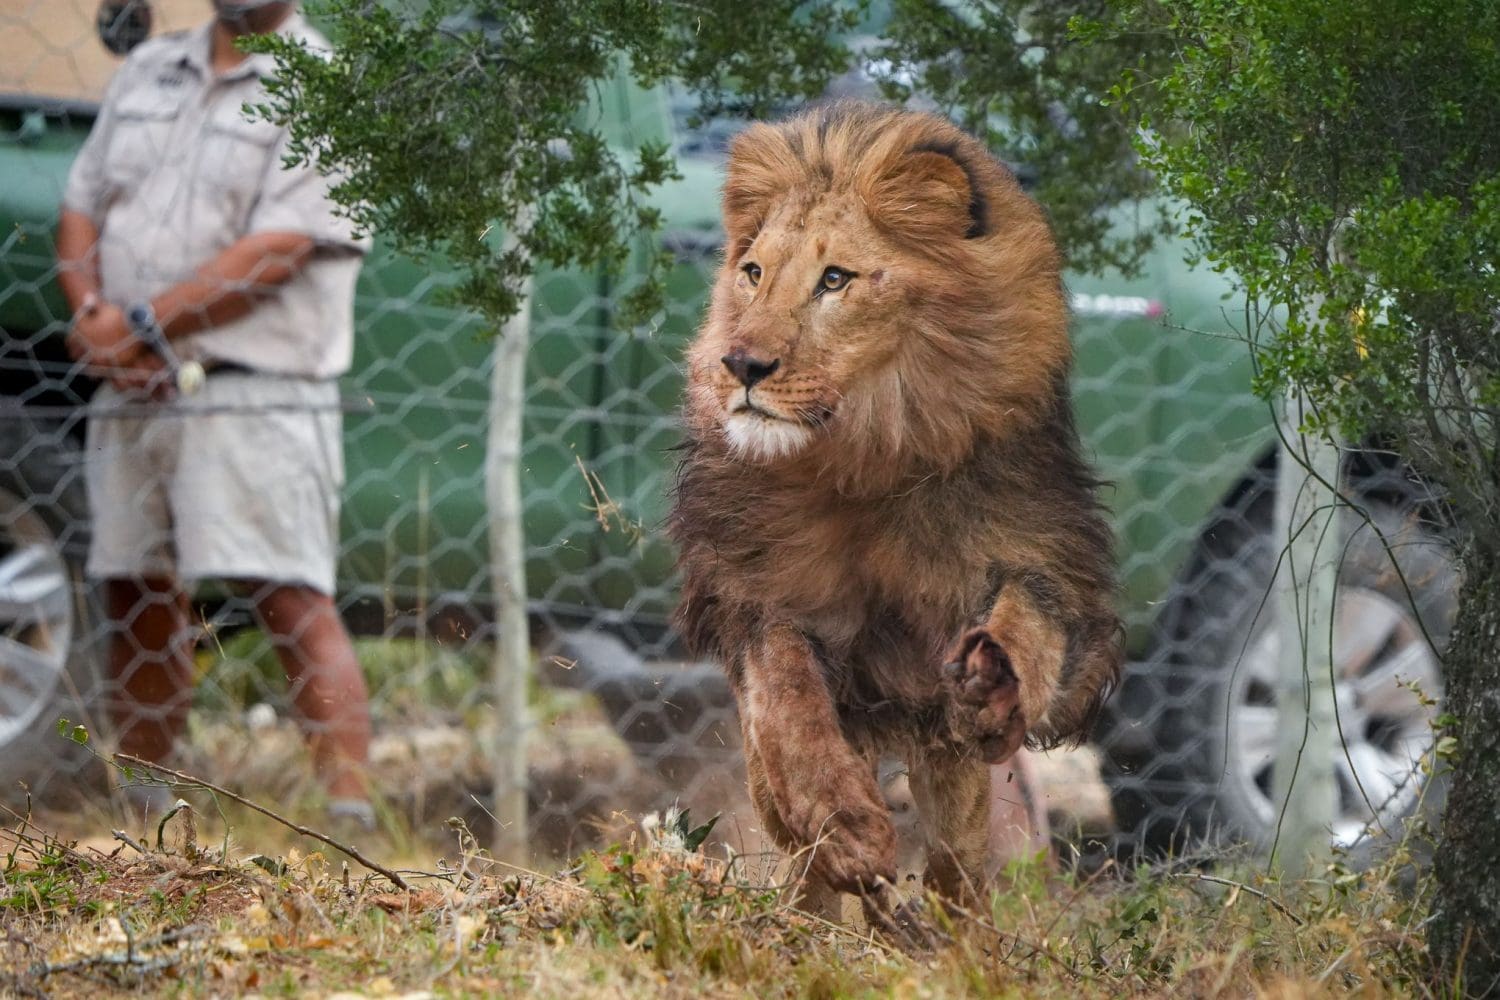 Tsar being released into his new home Lion